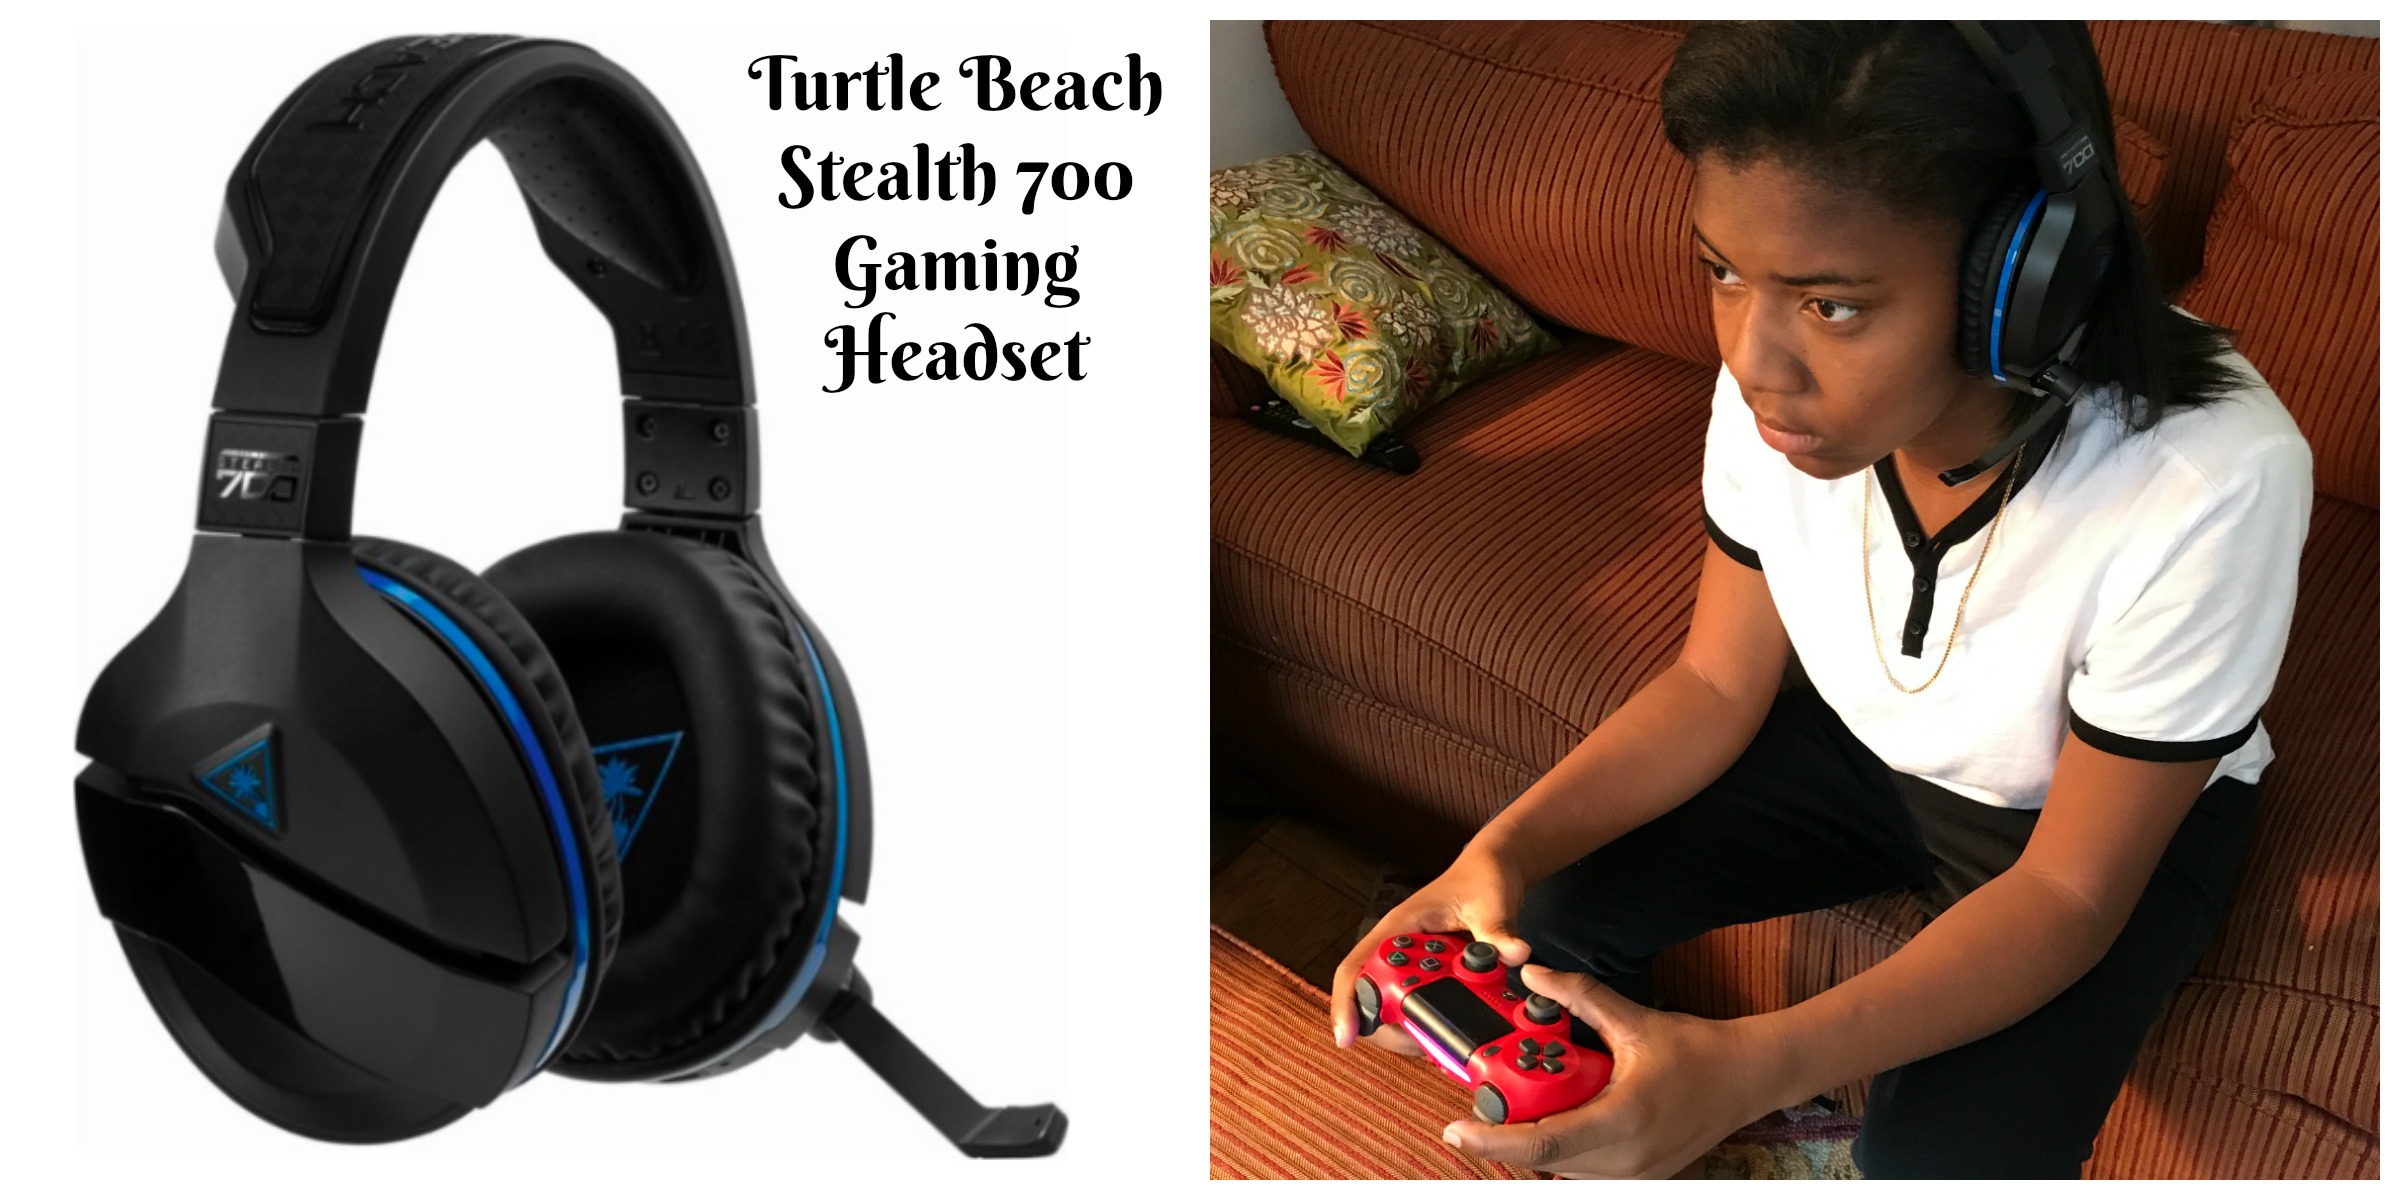 turtle beach stealth 700 gaming headset